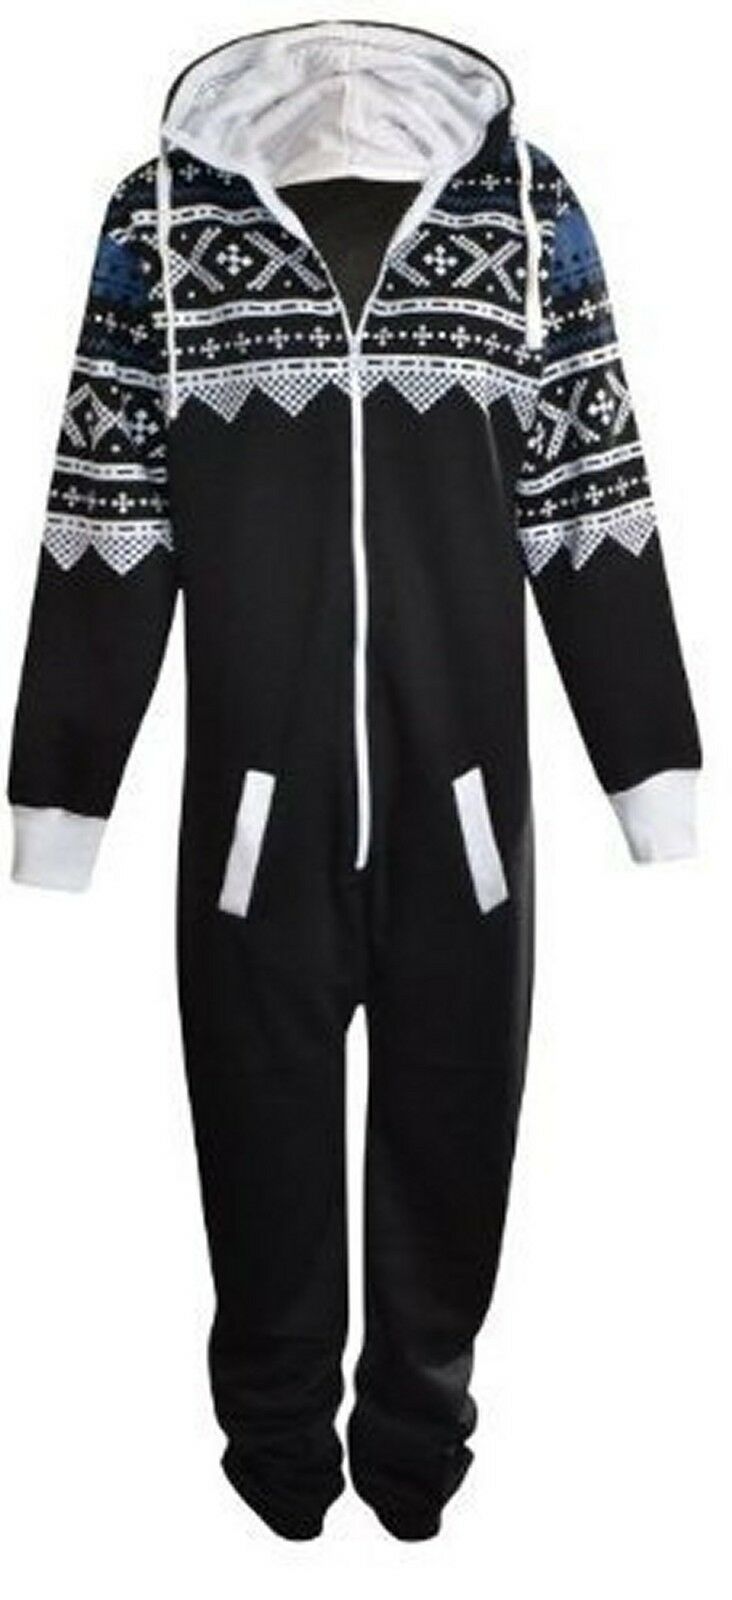 Adult Black Aztec Design Onesie. Cotton Lined Hood With Fleece Lining In The Rest Of The Onesie. The Cuffs and Ankles Are Ribbed Elastic. These Are To Be Worn Loosely. Sizes Small To X- Large.